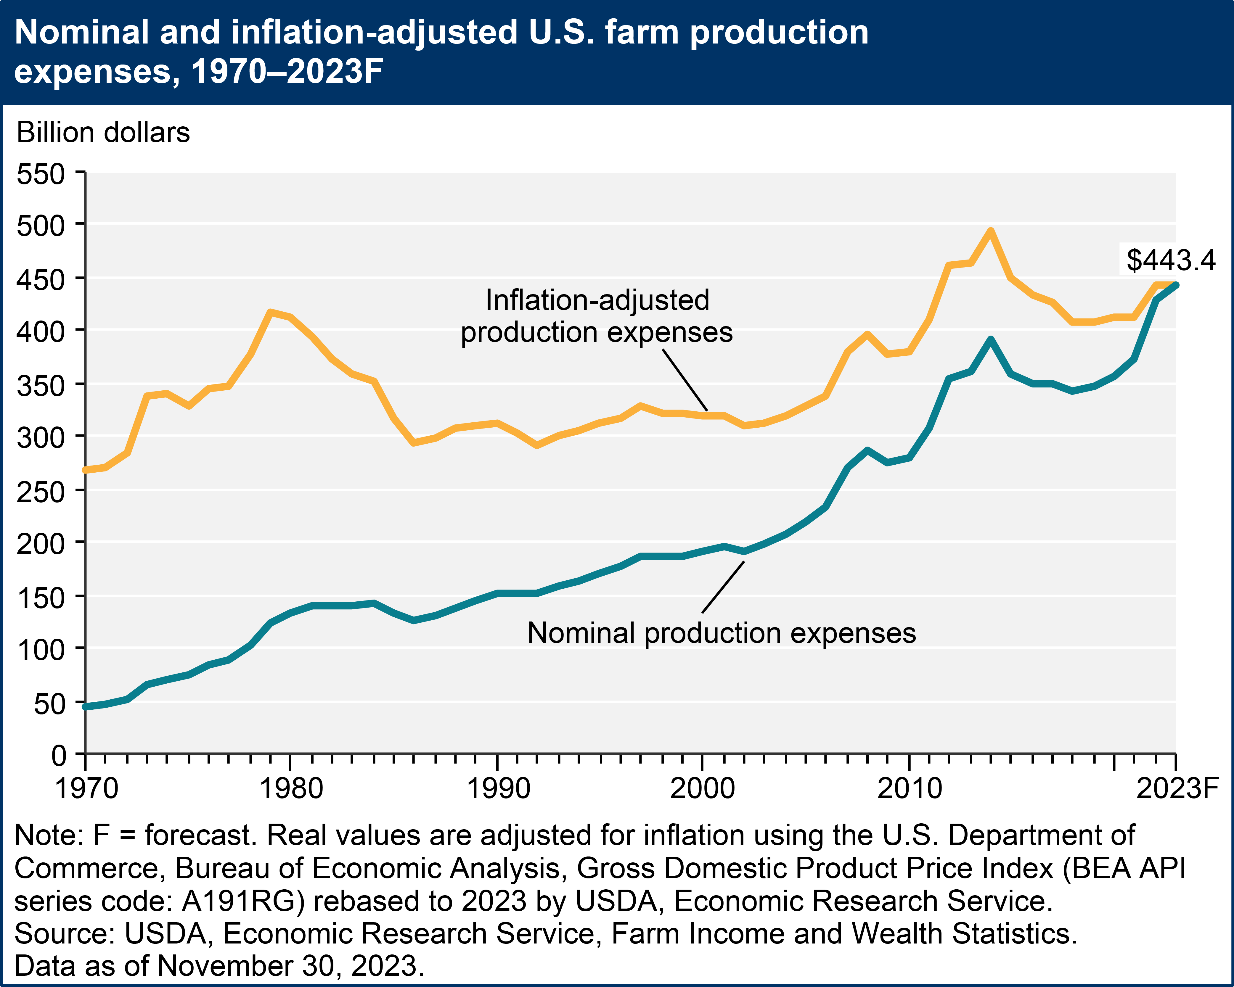 Farm production expenses between 1970 and 2023 show variation in both the nominal and inflation-adjusted production expenses over the whole period, with spikes in adjusted figures in the late 1970s and again around 2014, with a closing value of $443.4 billion for 2023.